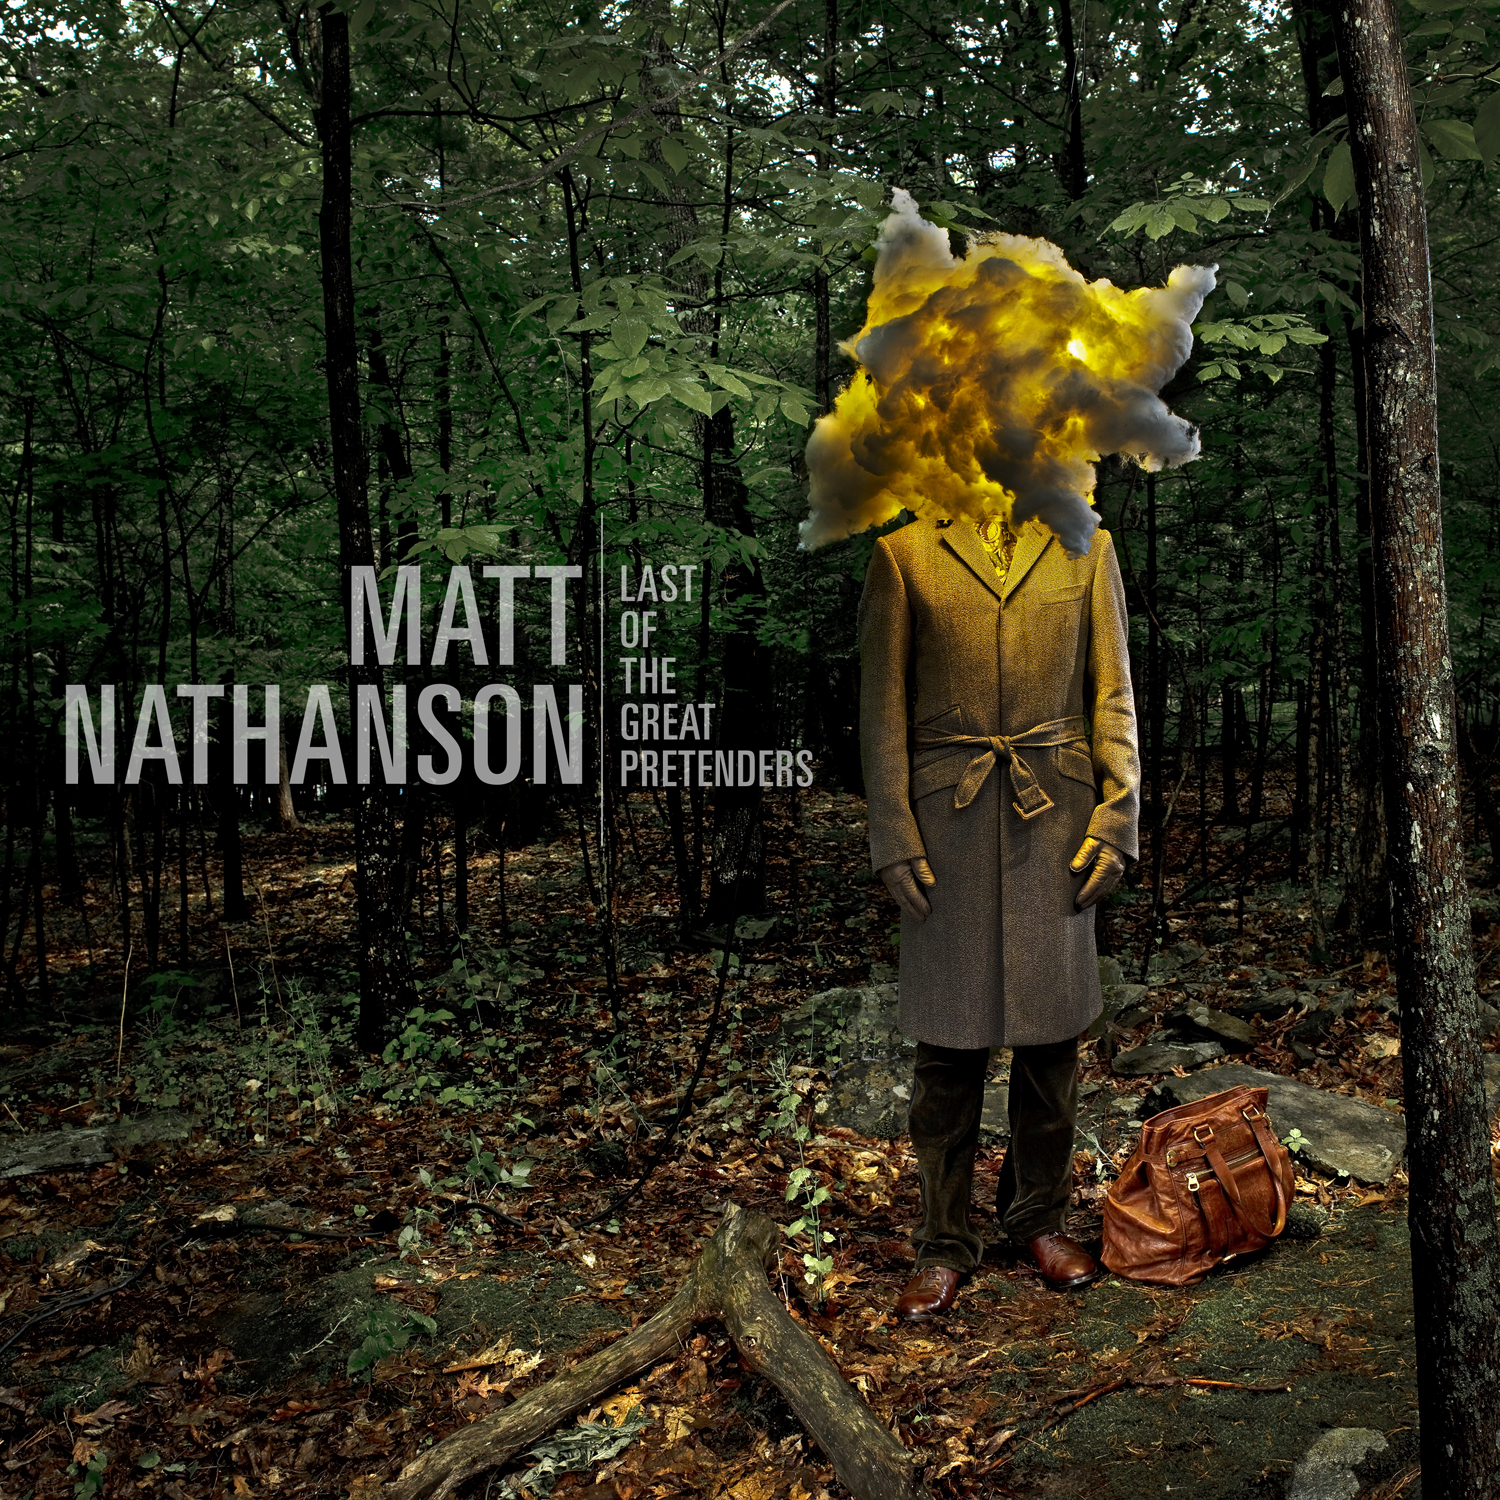 News Added Jul 12, 2013 Matt Nathanson (born March 28, 1973) is an American singer-songwriter whose work is a blend of folk and rock music. In addition to singing, he plays acoustic (sometimes a 12-string) and electric guitar, and has played both solo and with a full band. His work includes the platinum-selling song "Come […]